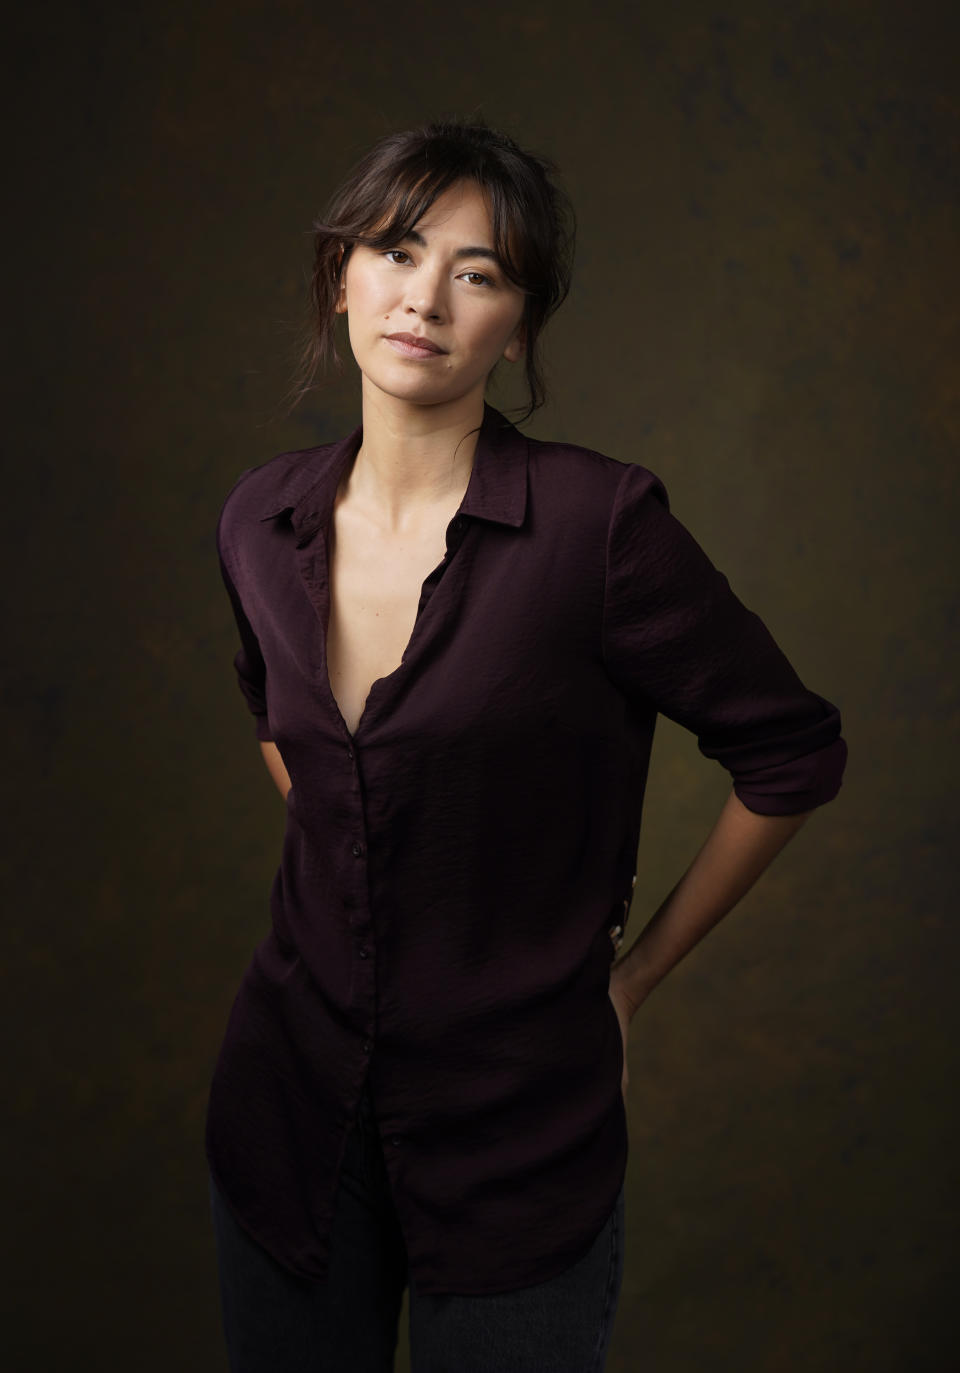 Actor Jessica Henwick poses for a portrait to promote the film "Glass Onion: A Knives Out Mystery" on Thursday, Dec. 8, 2022, in Los Angeles. (AP Photo/Chris Pizzello)